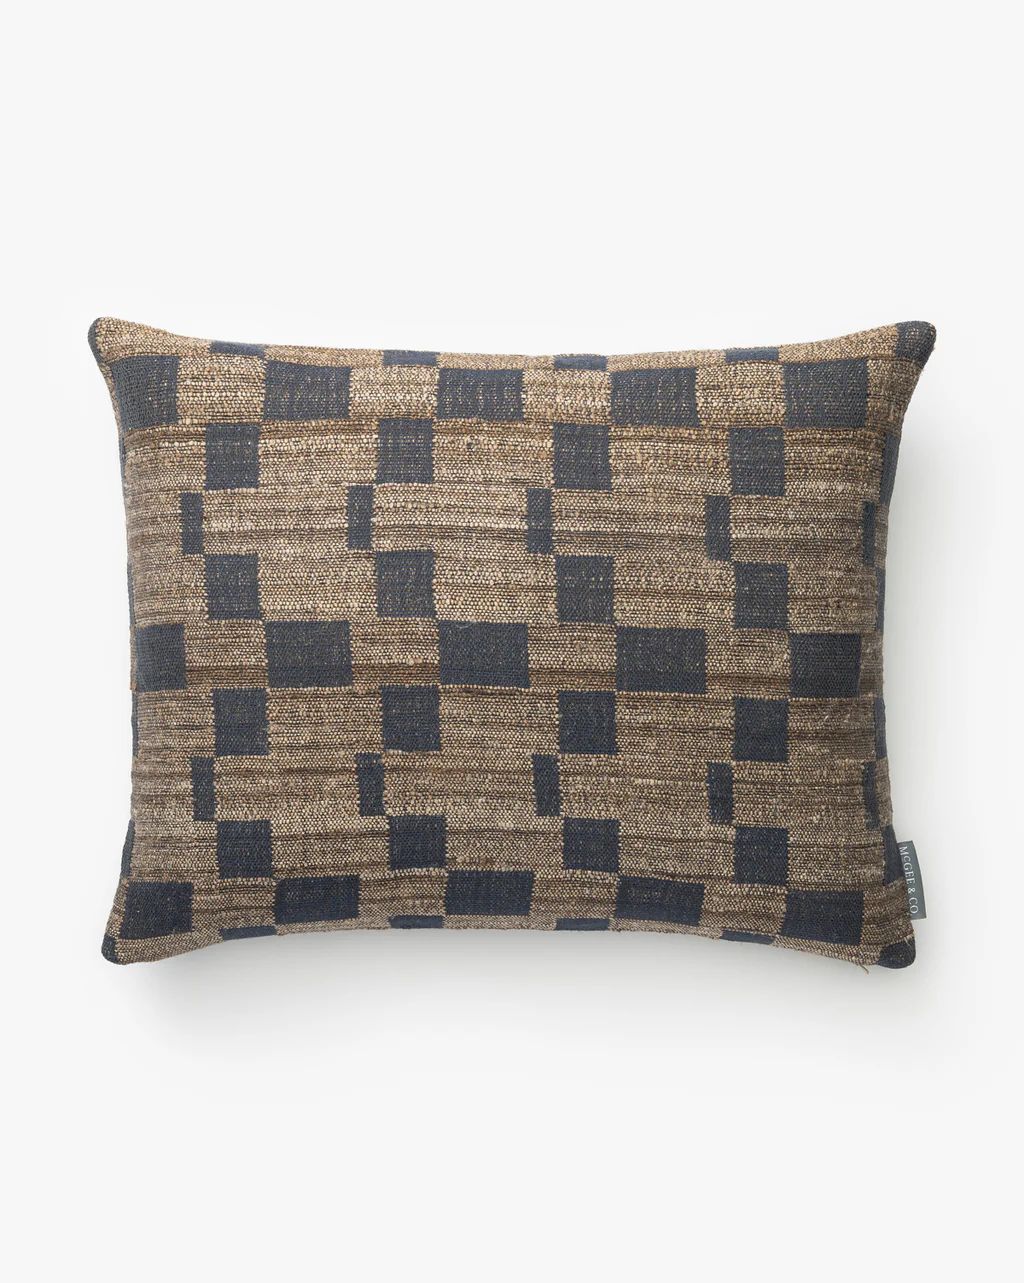 Hedgerow Navy Pillow Cover | McGee & Co.